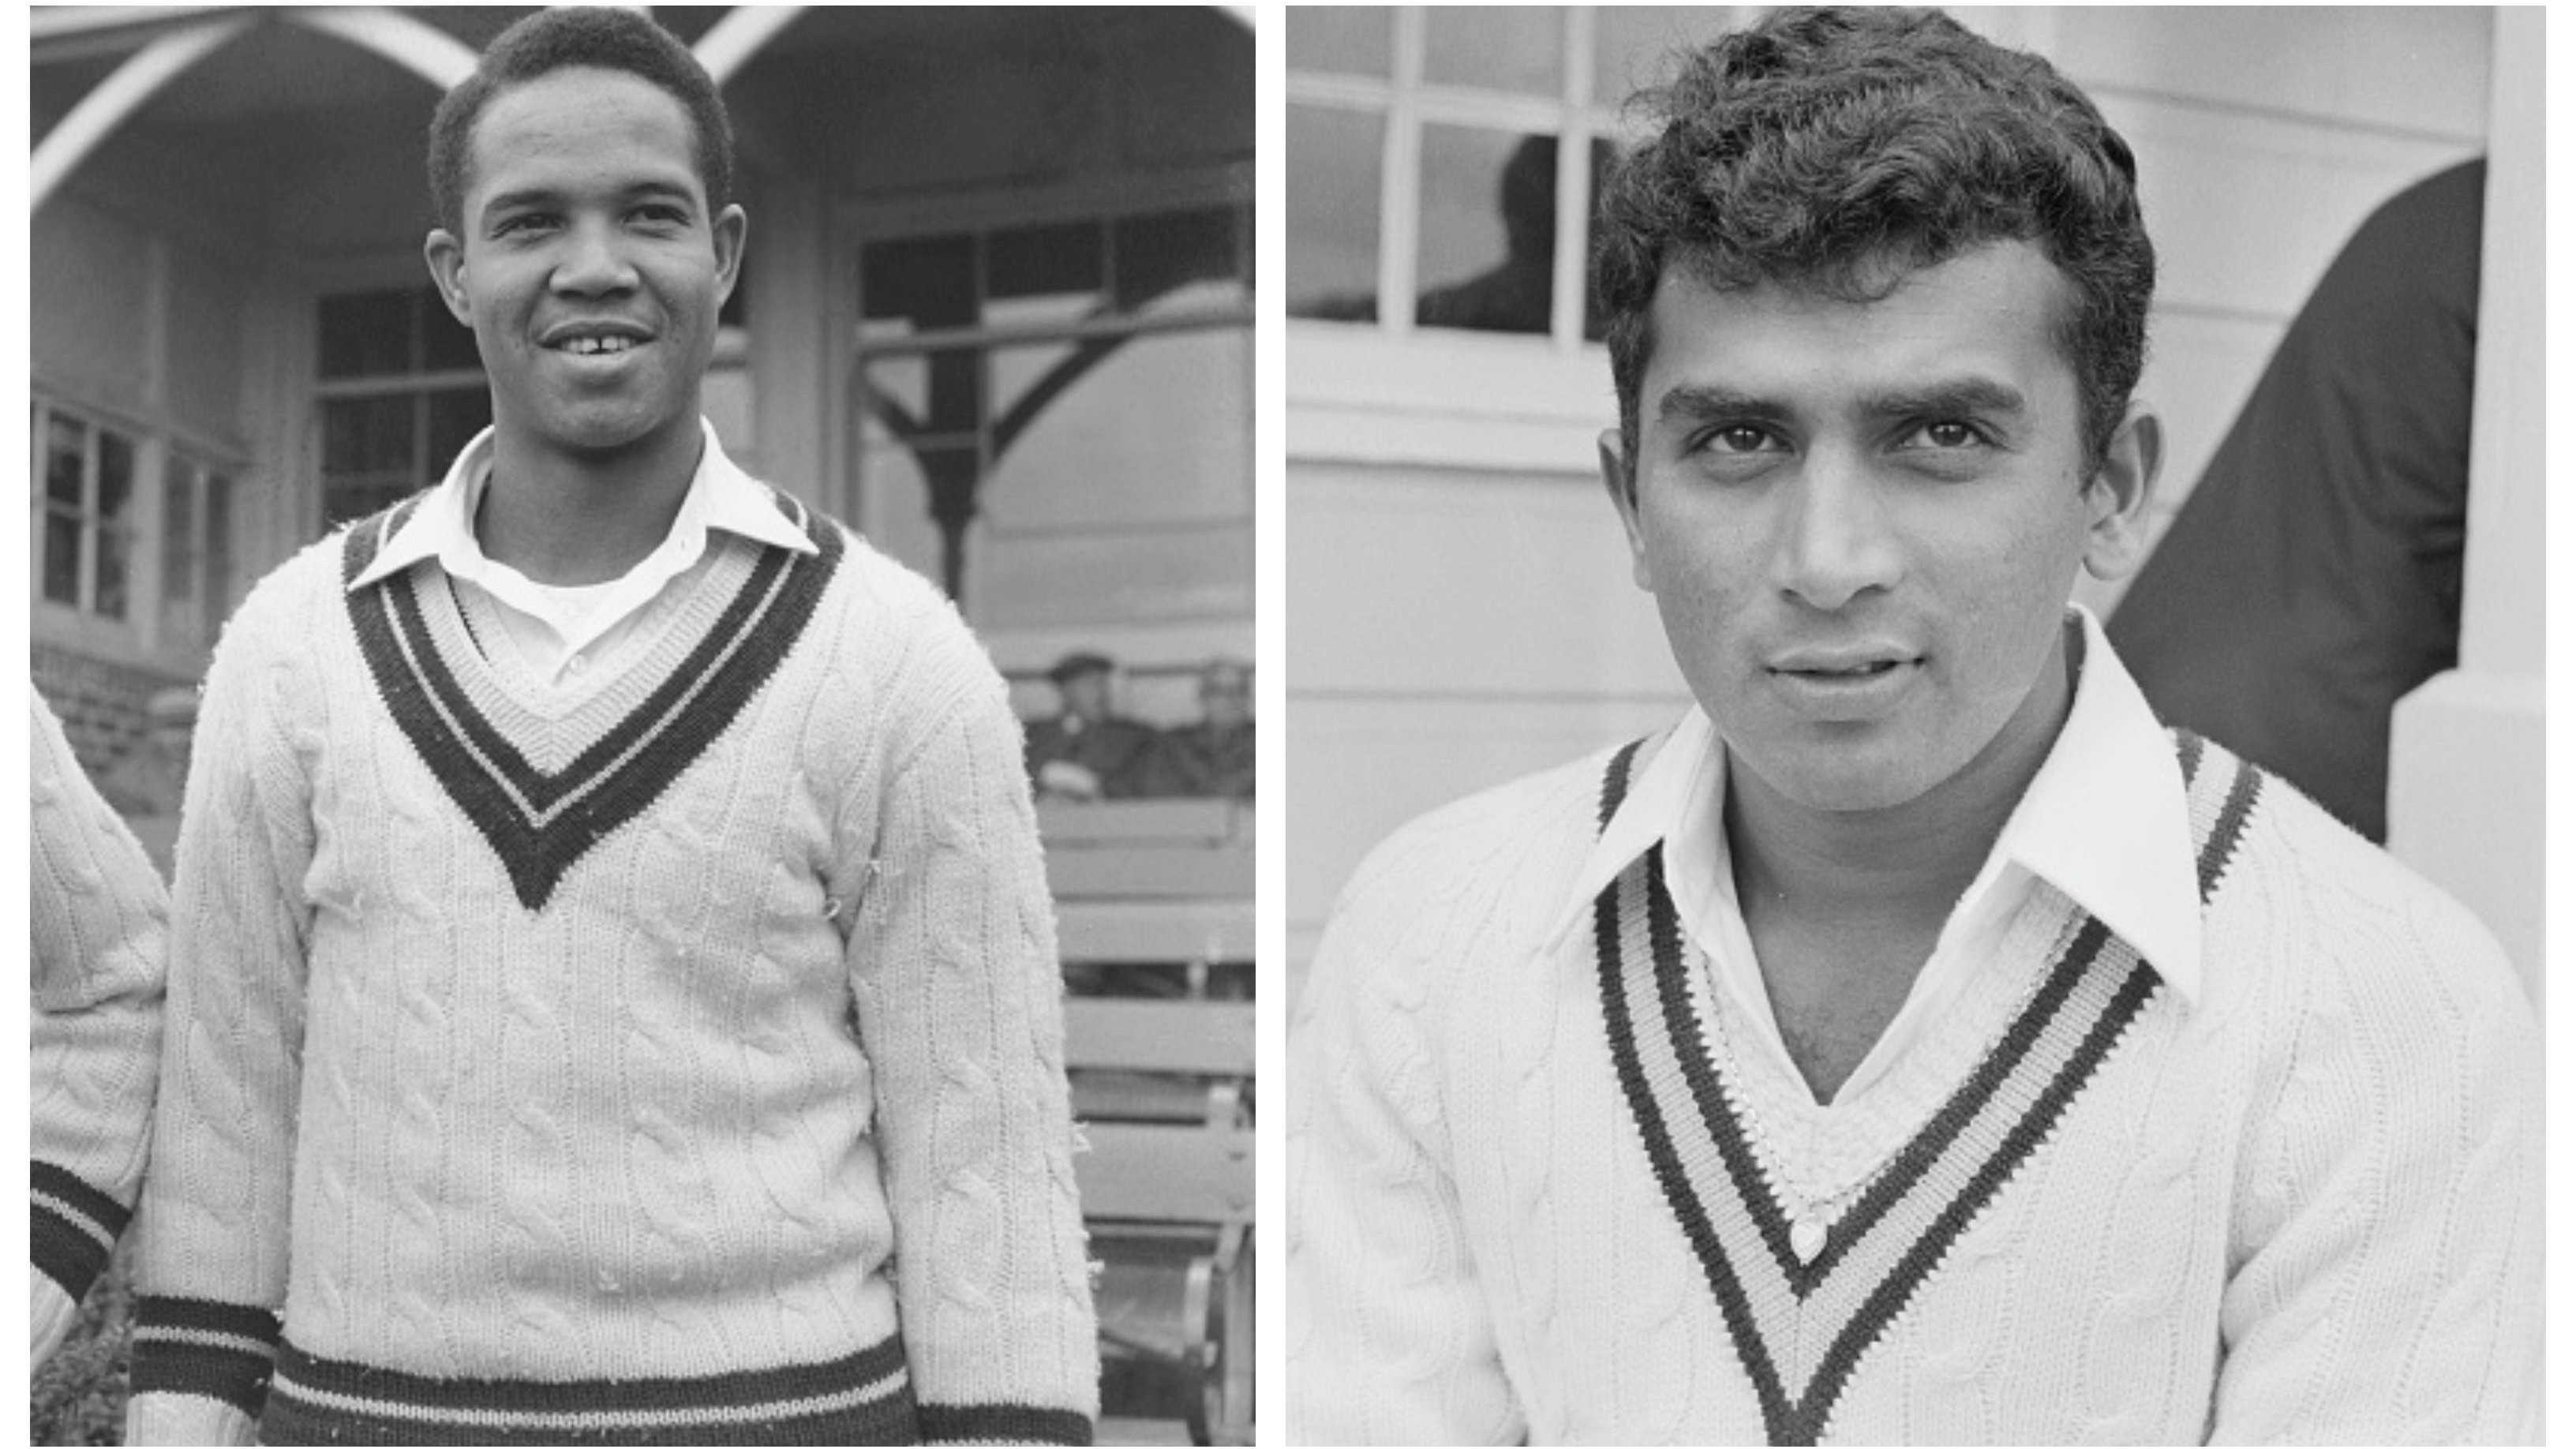 “I got a gift of cricketing life”, Gavaskar recalls Sobers dropping his catch in debut Test series